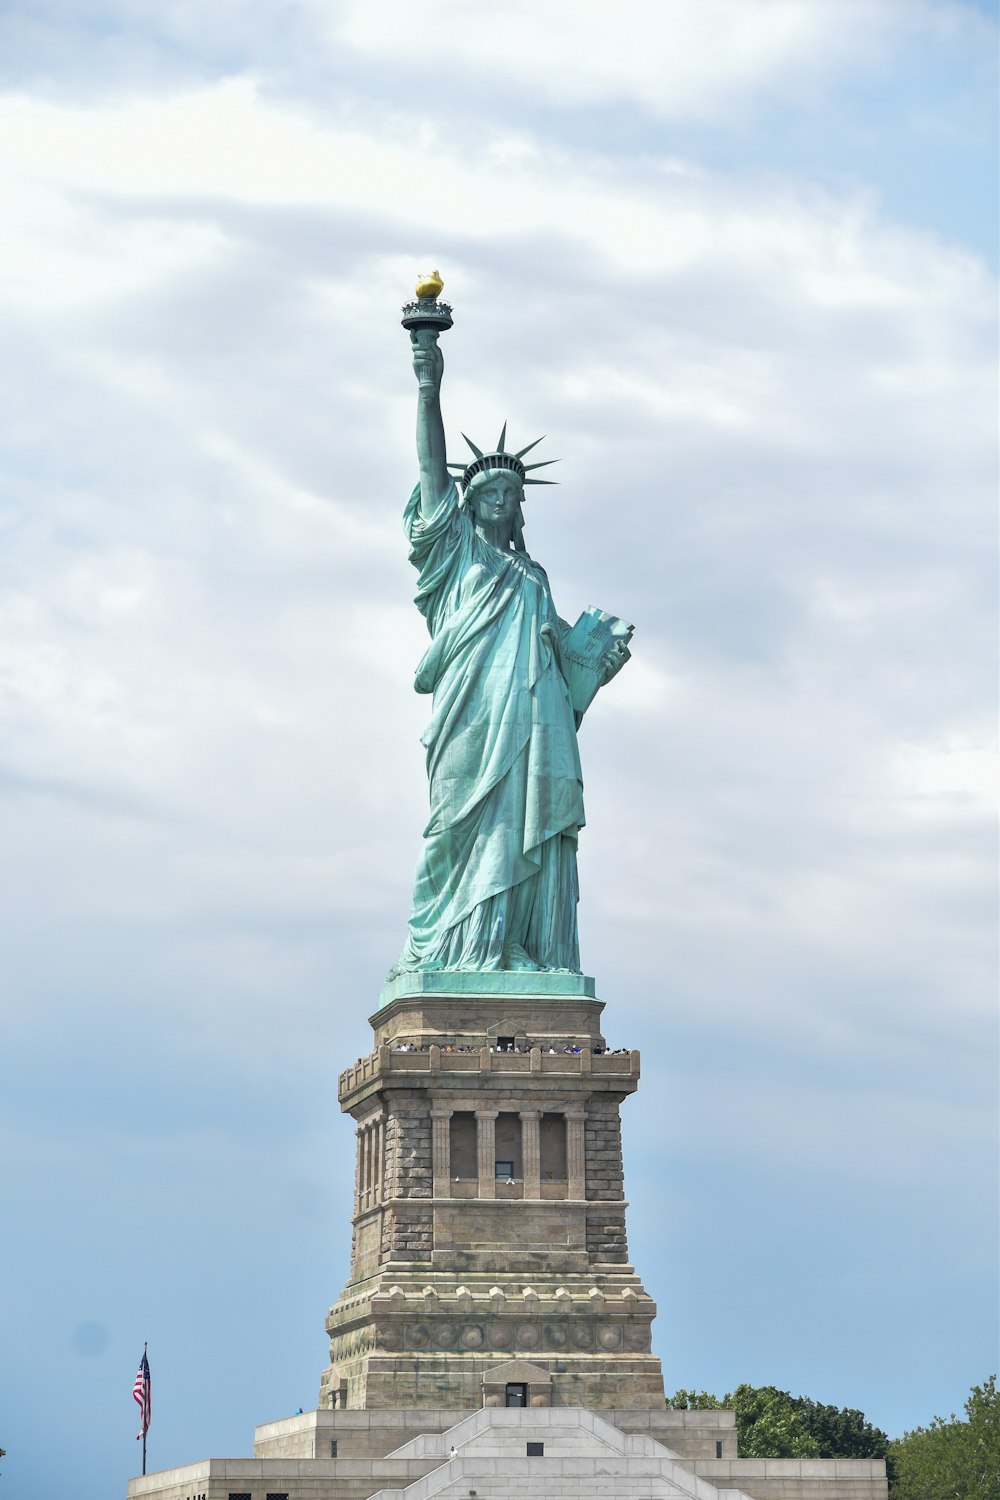 Statue of Liberty at daytime